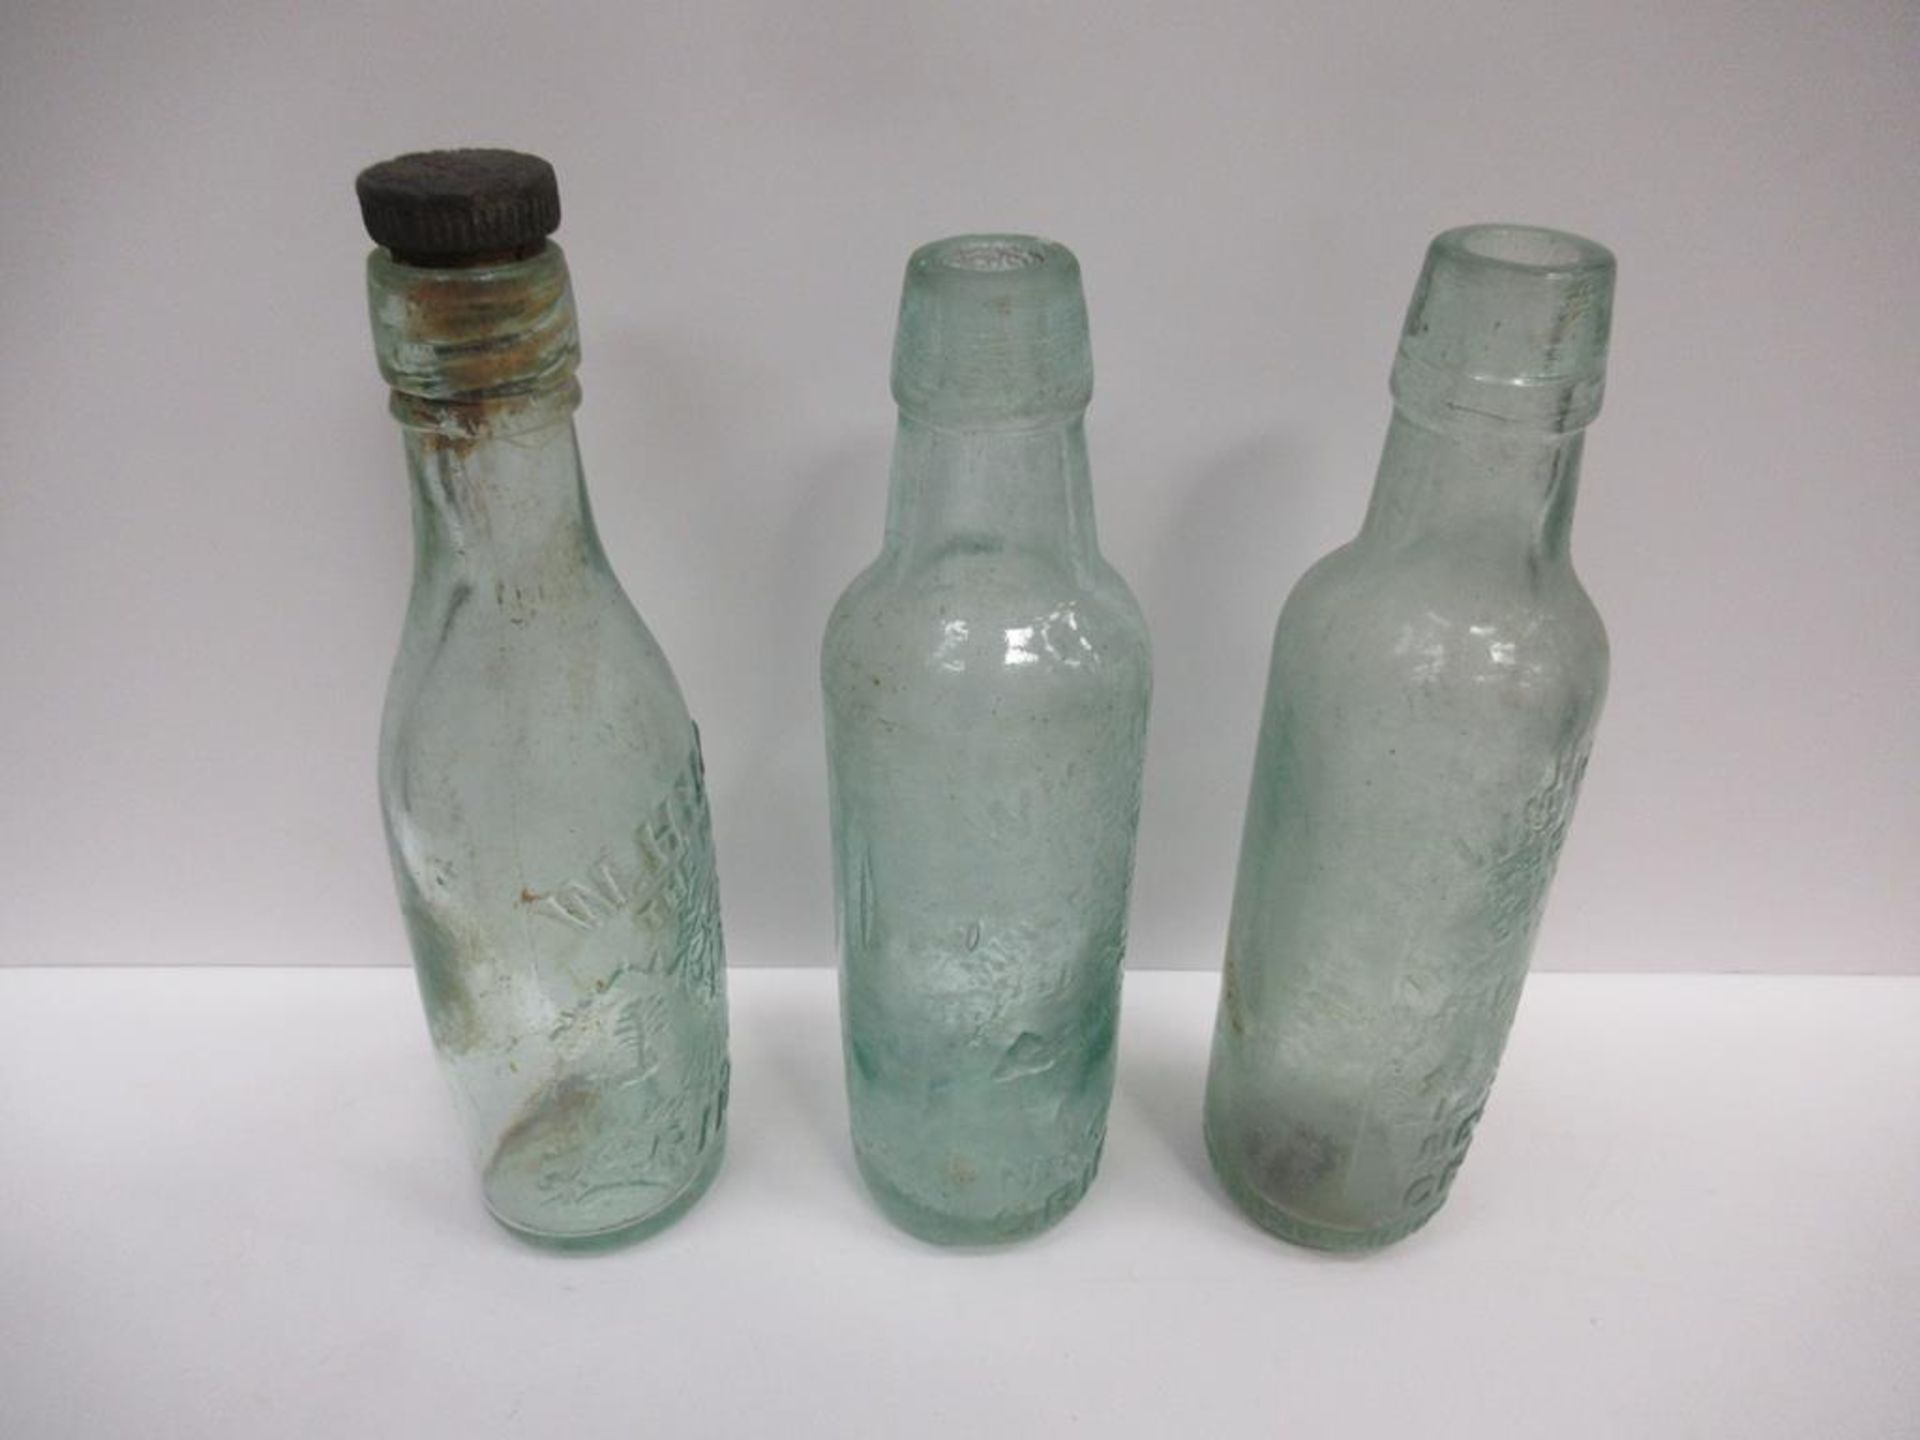 6x Grimsby (3x New Clee) W. Hill & Son (2) and W. Hill & Co (2) bottles - Image 16 of 25